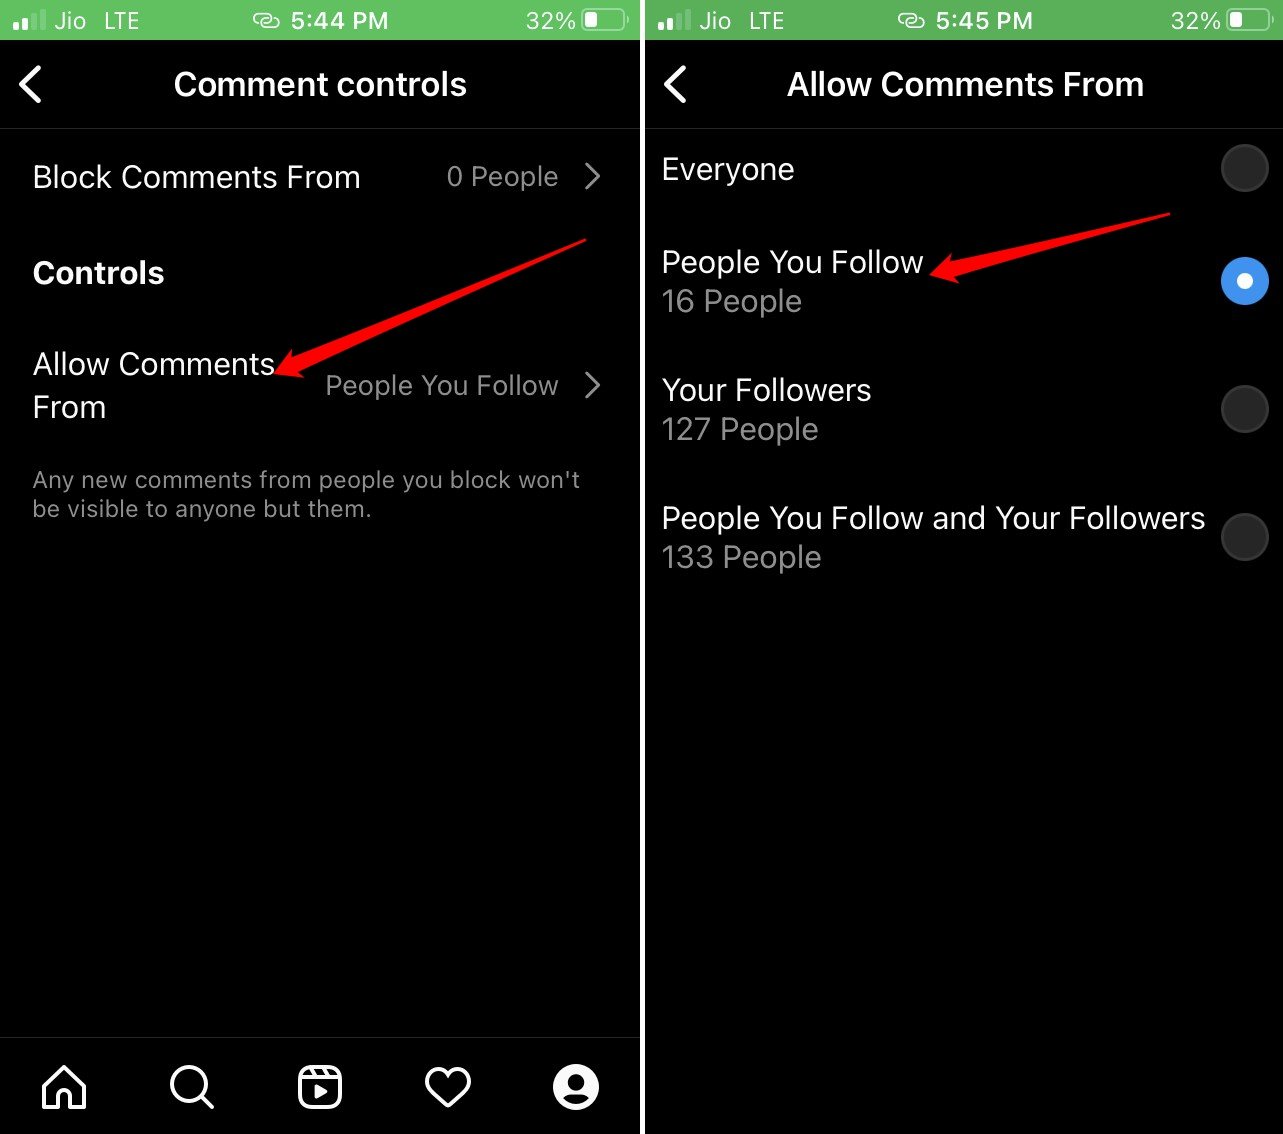 allow comments from people you follow